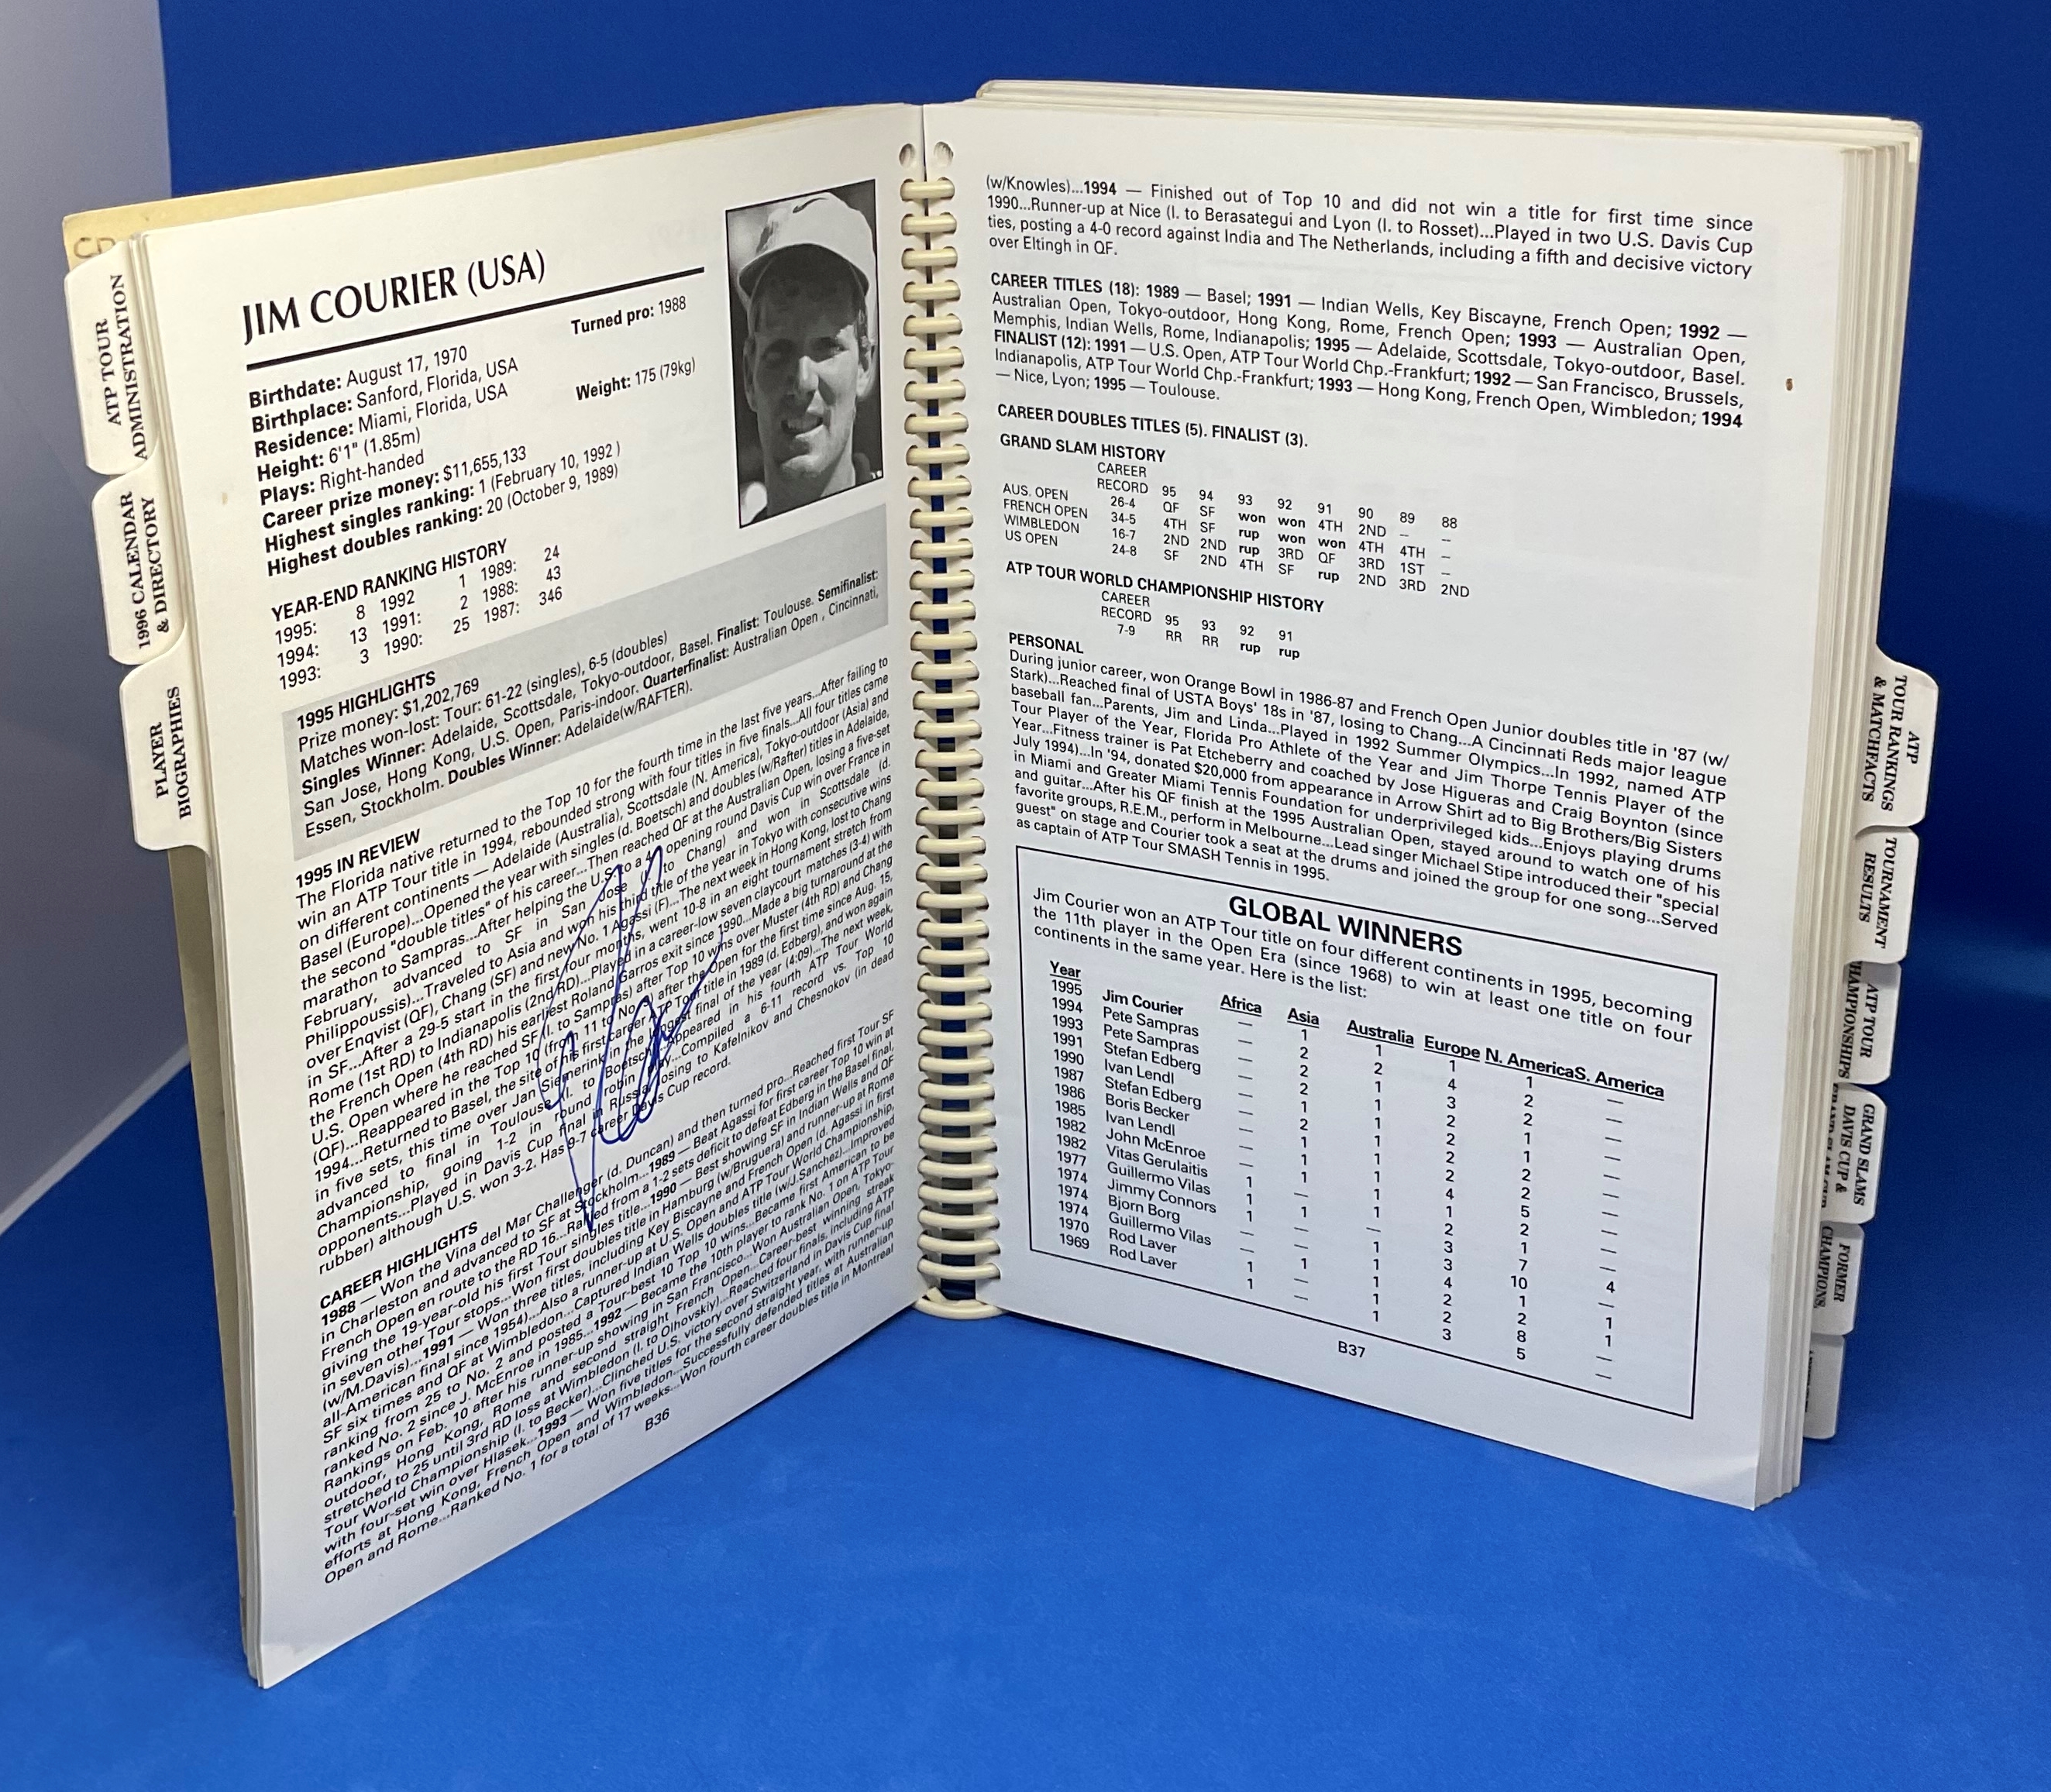 1996 ATP Player Guide Signed by 9 players on their respective biography pages. It is signed by: